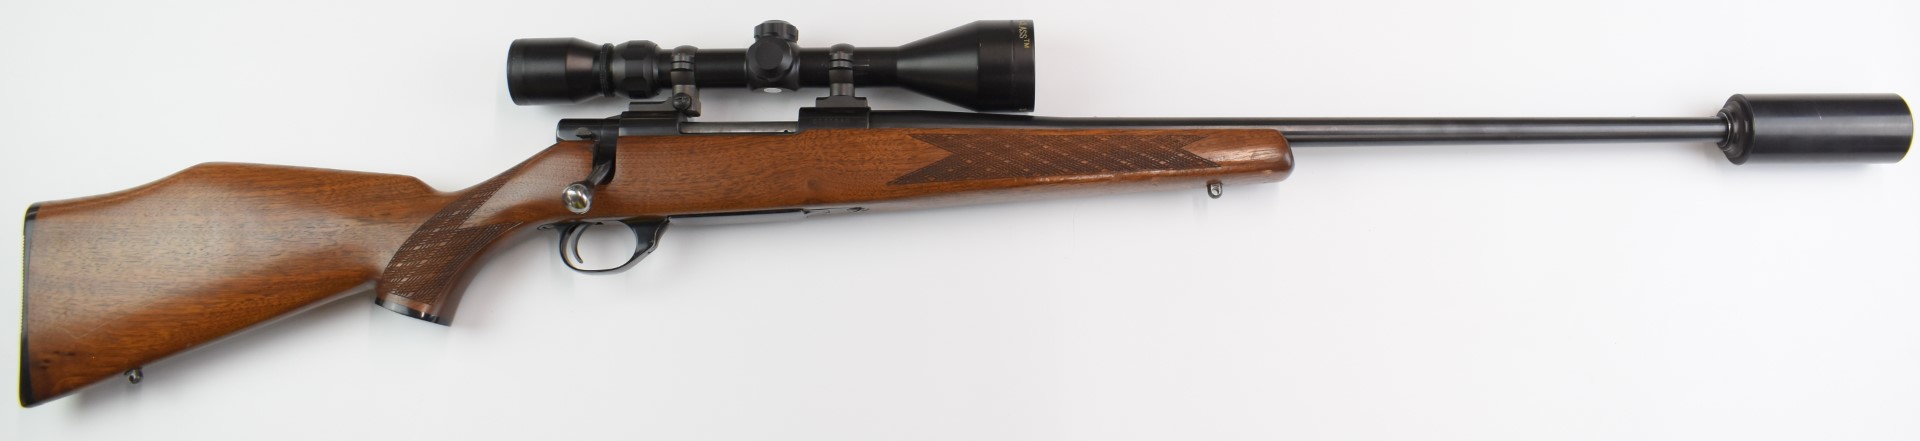 RWS Model 89 .22-250 bolt action rifle with textured semi-pistol grip and forend, raised cheek- - Image 4 of 20